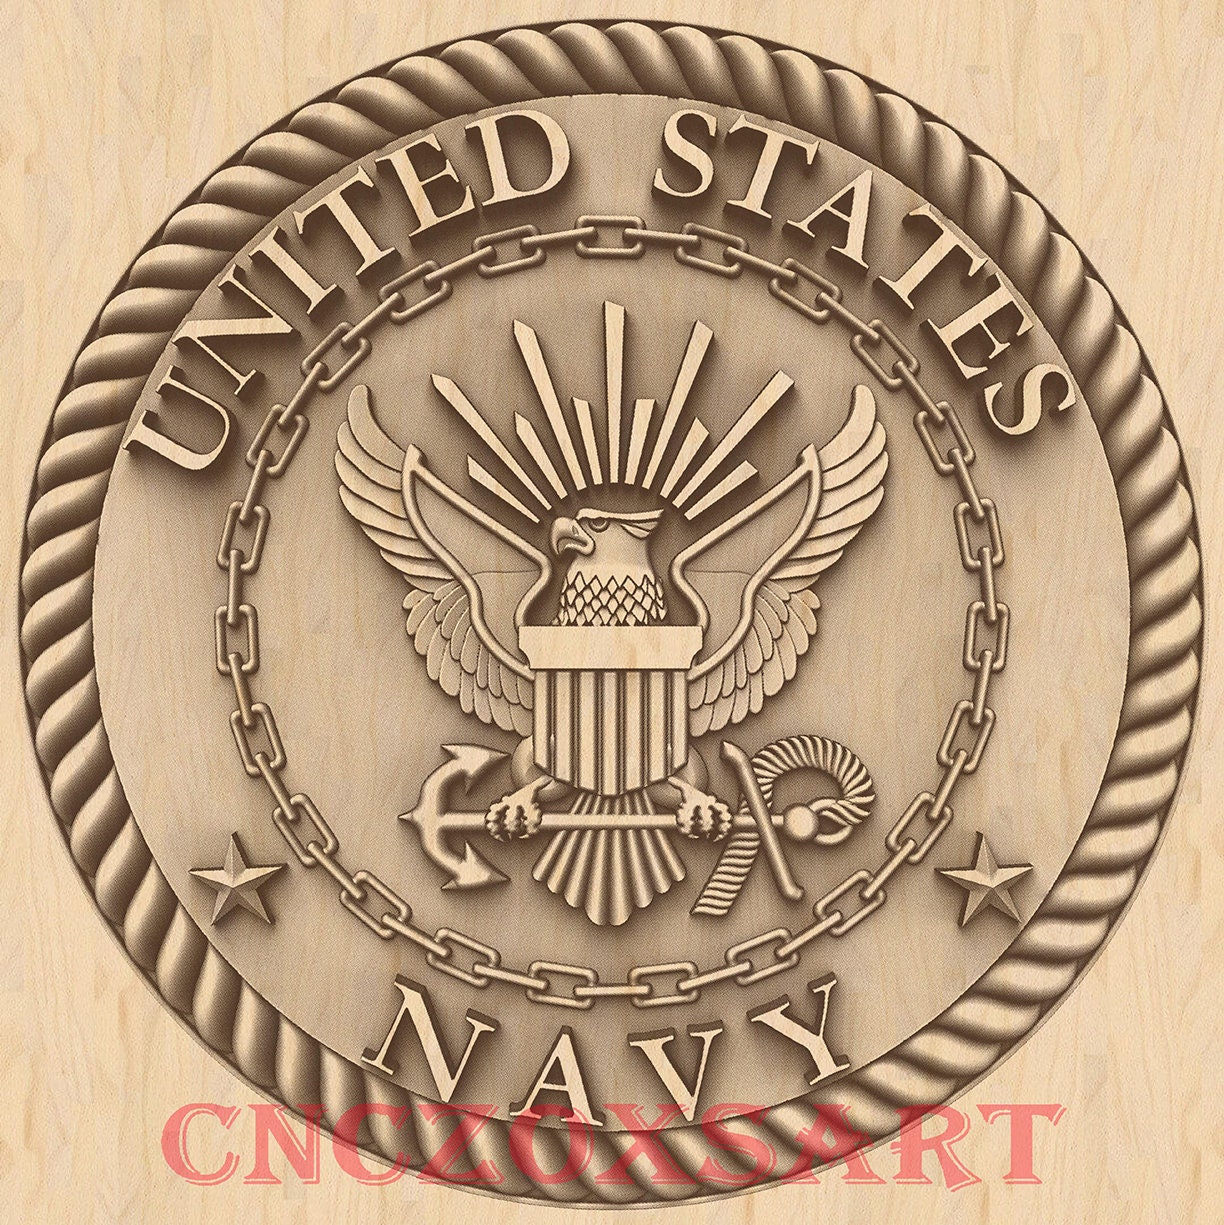 3D Diplomatic Security Badge carving – Moore Signs & Designs